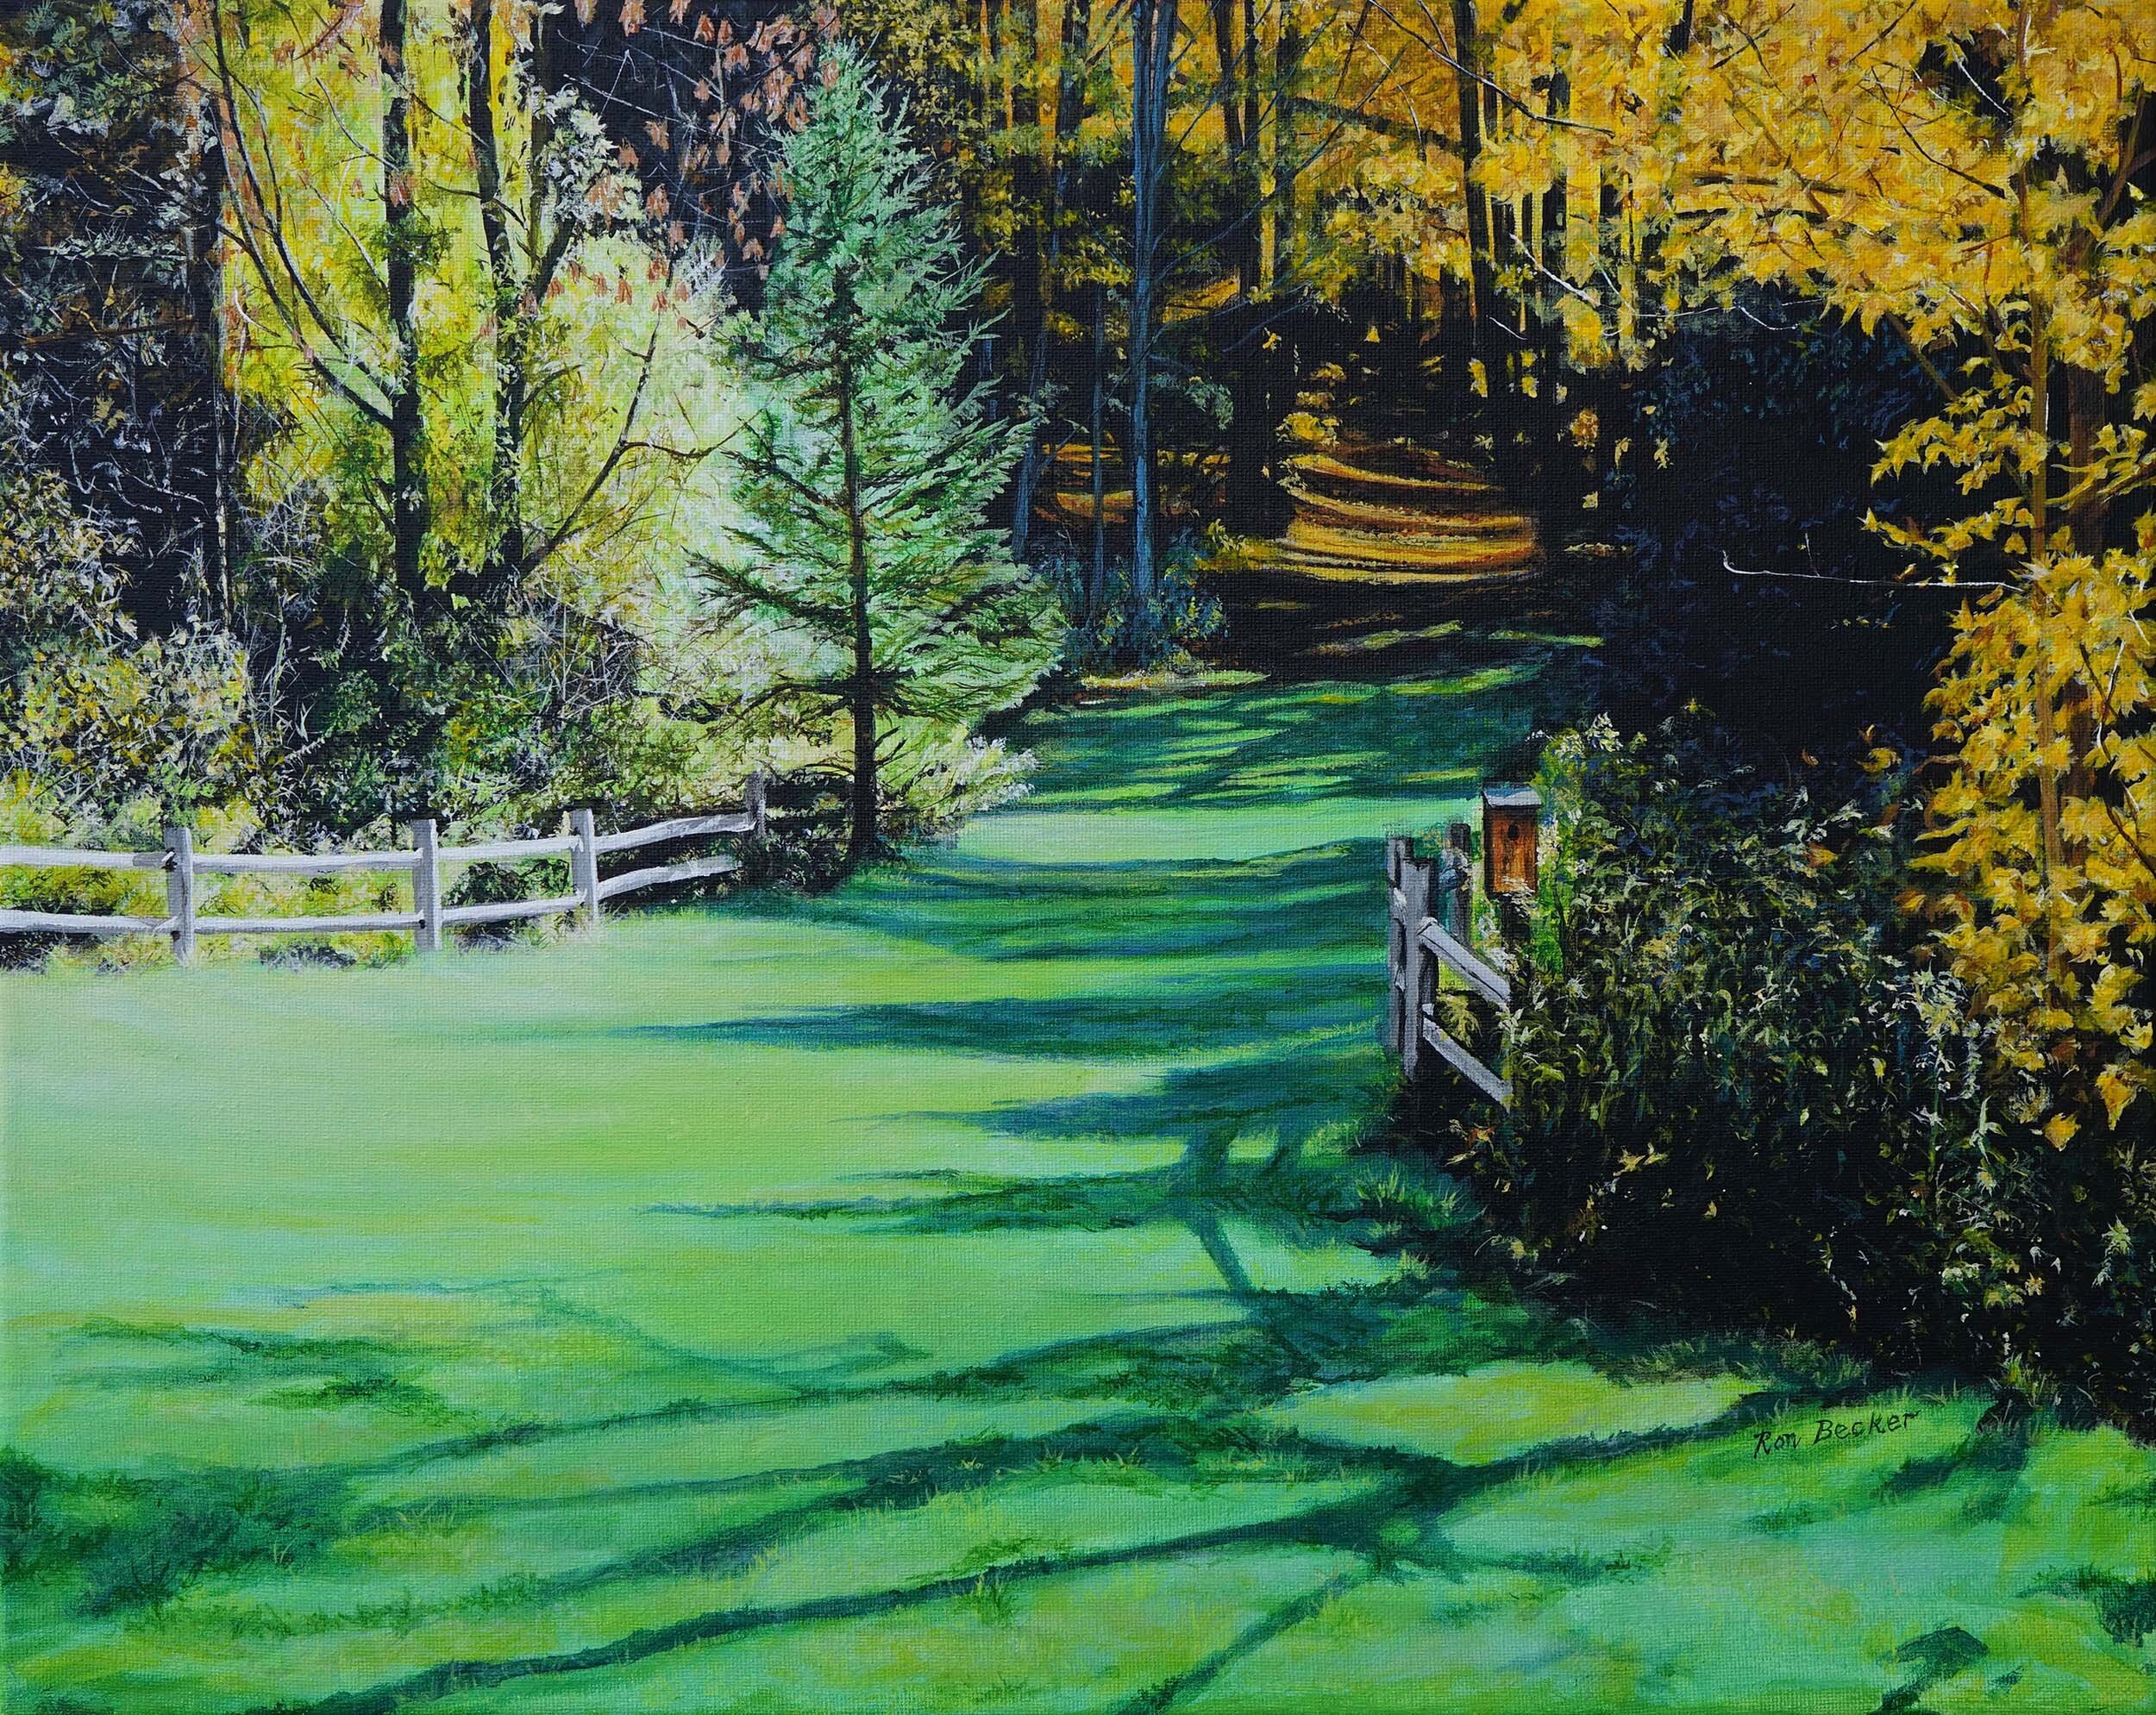 Come Walk with Me - acrylic - 16 x 20 - $1450